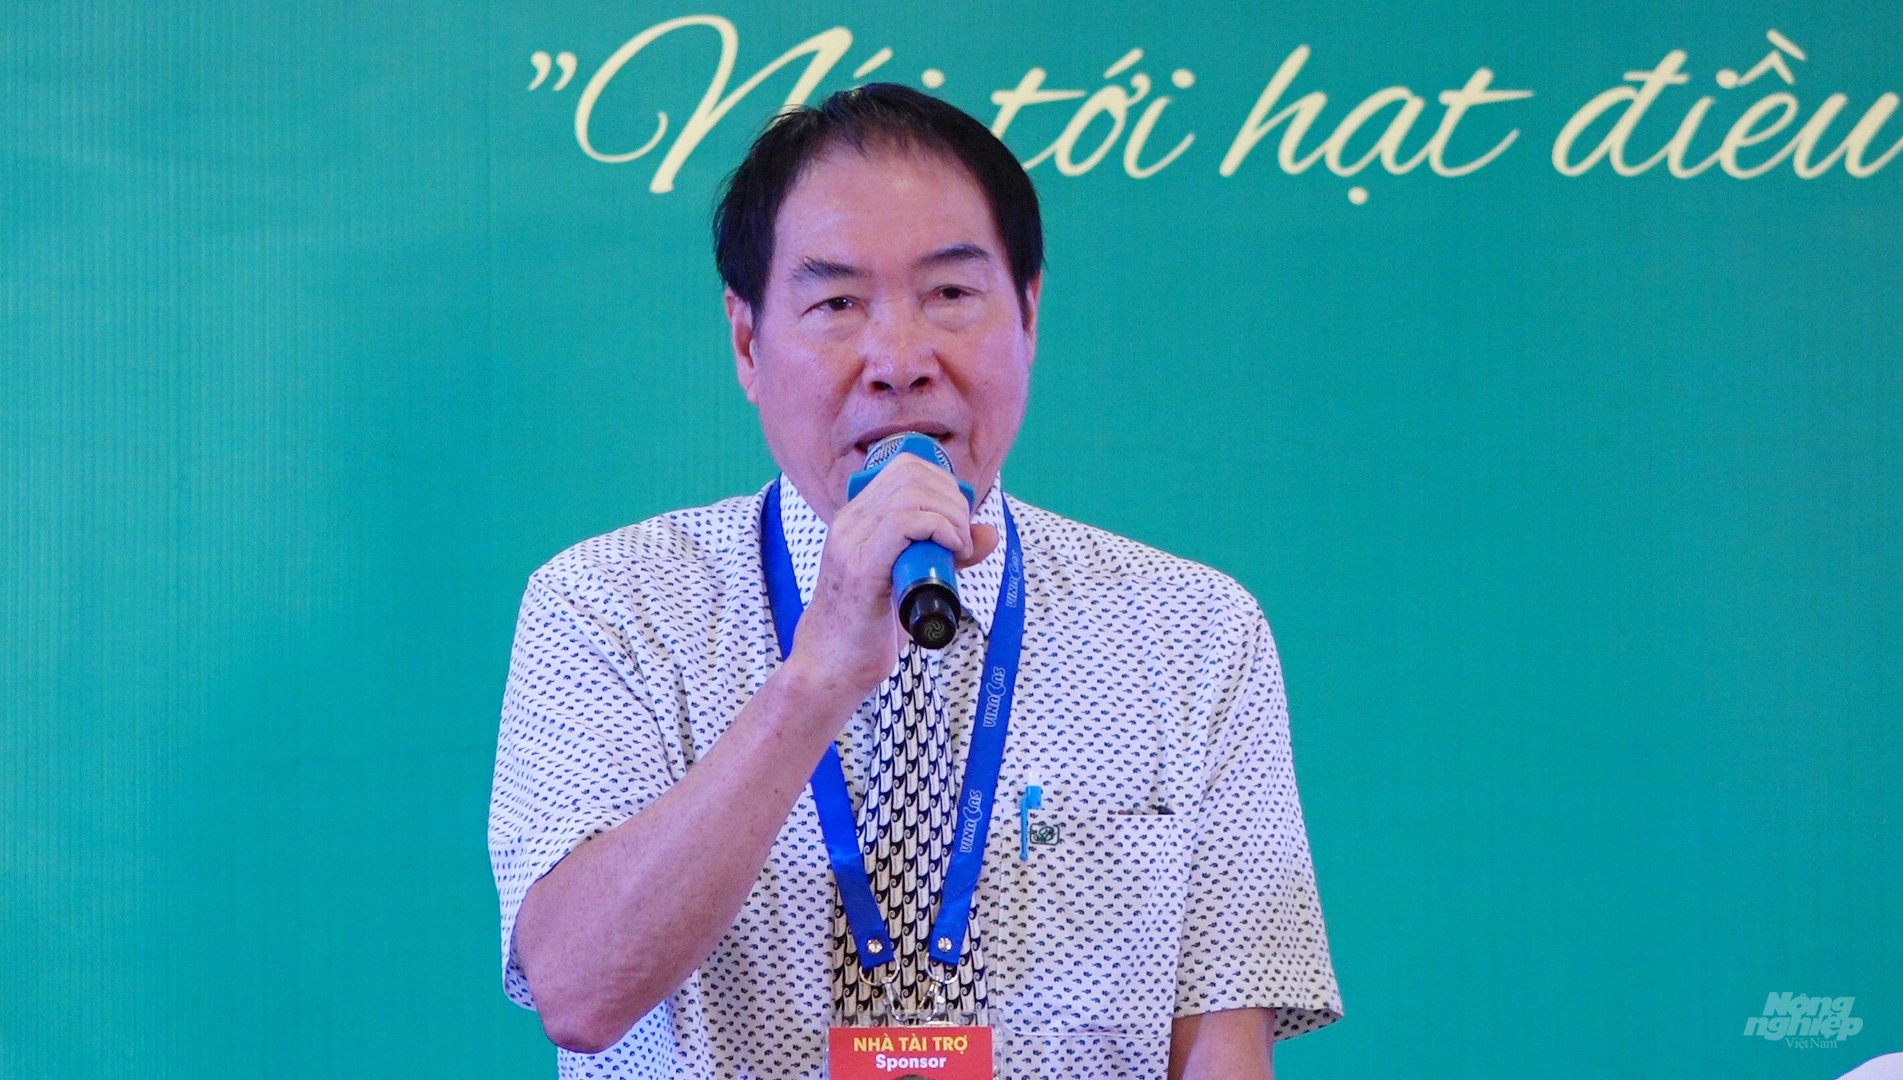 Mr. Pham Van Cong, Chairman of Vinacas, affirmed that the Executive Committee, term X, 2021 - 2026, will uphold the spirit of solidarity with science and technology as key. Photo: Minh Sang.